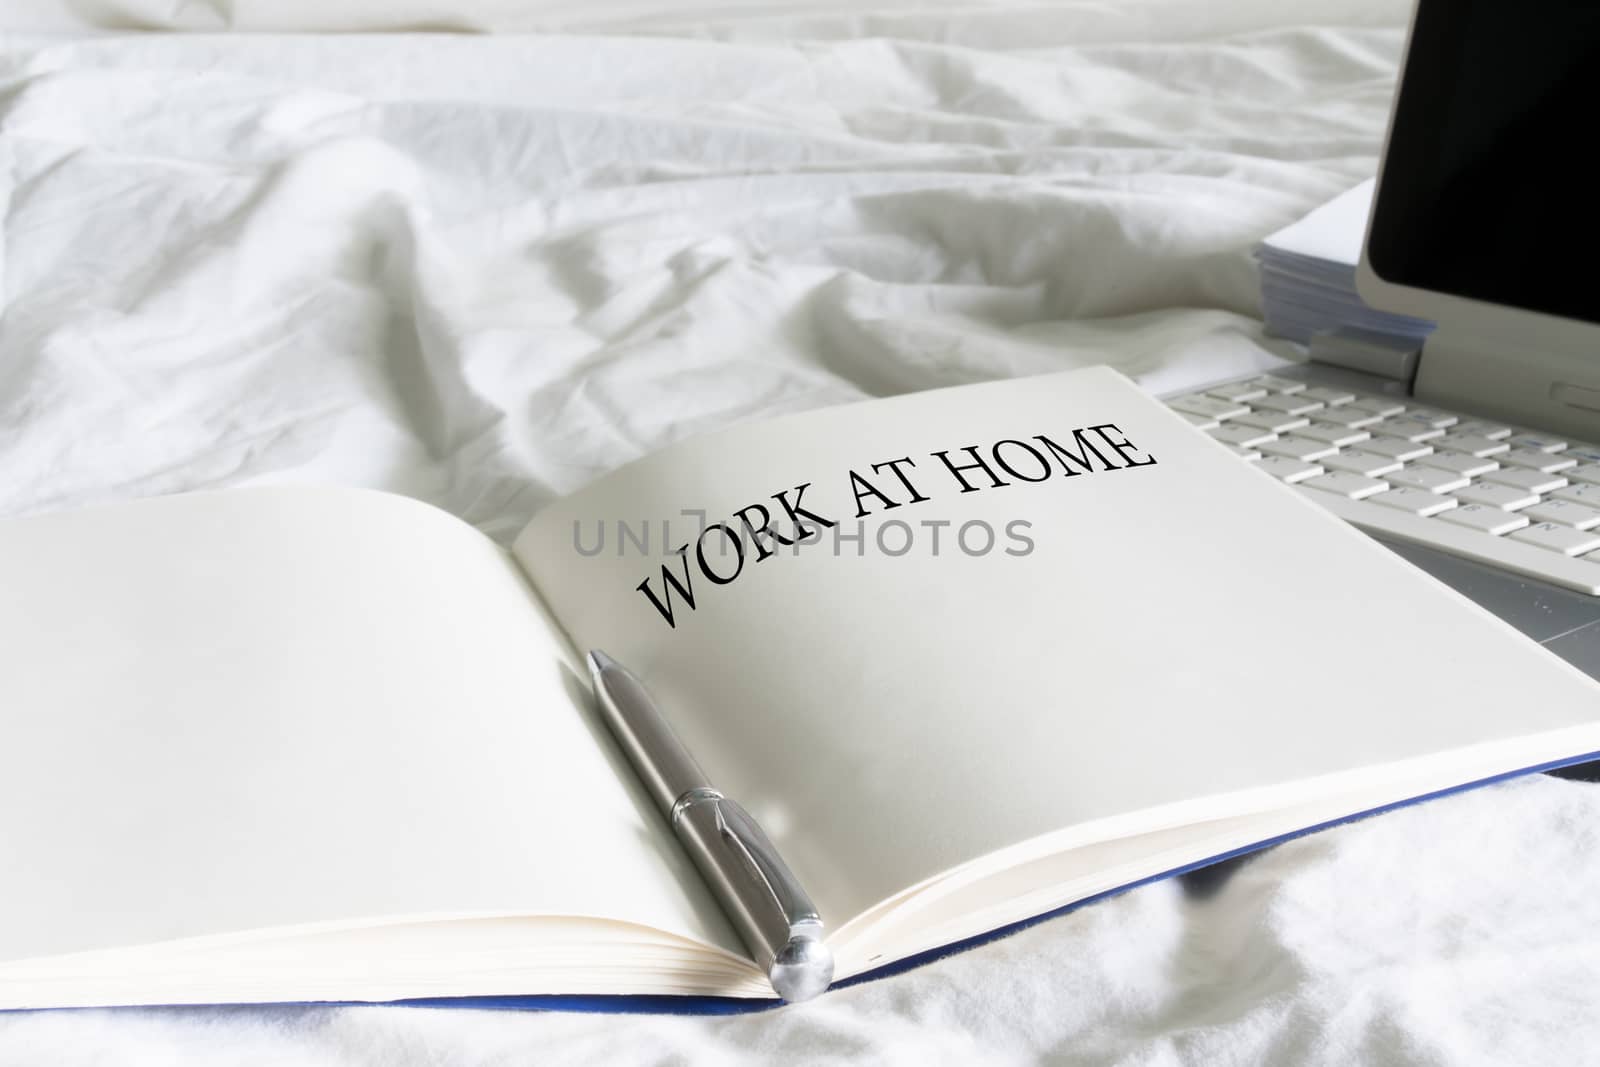 Work at home text on book with laptop